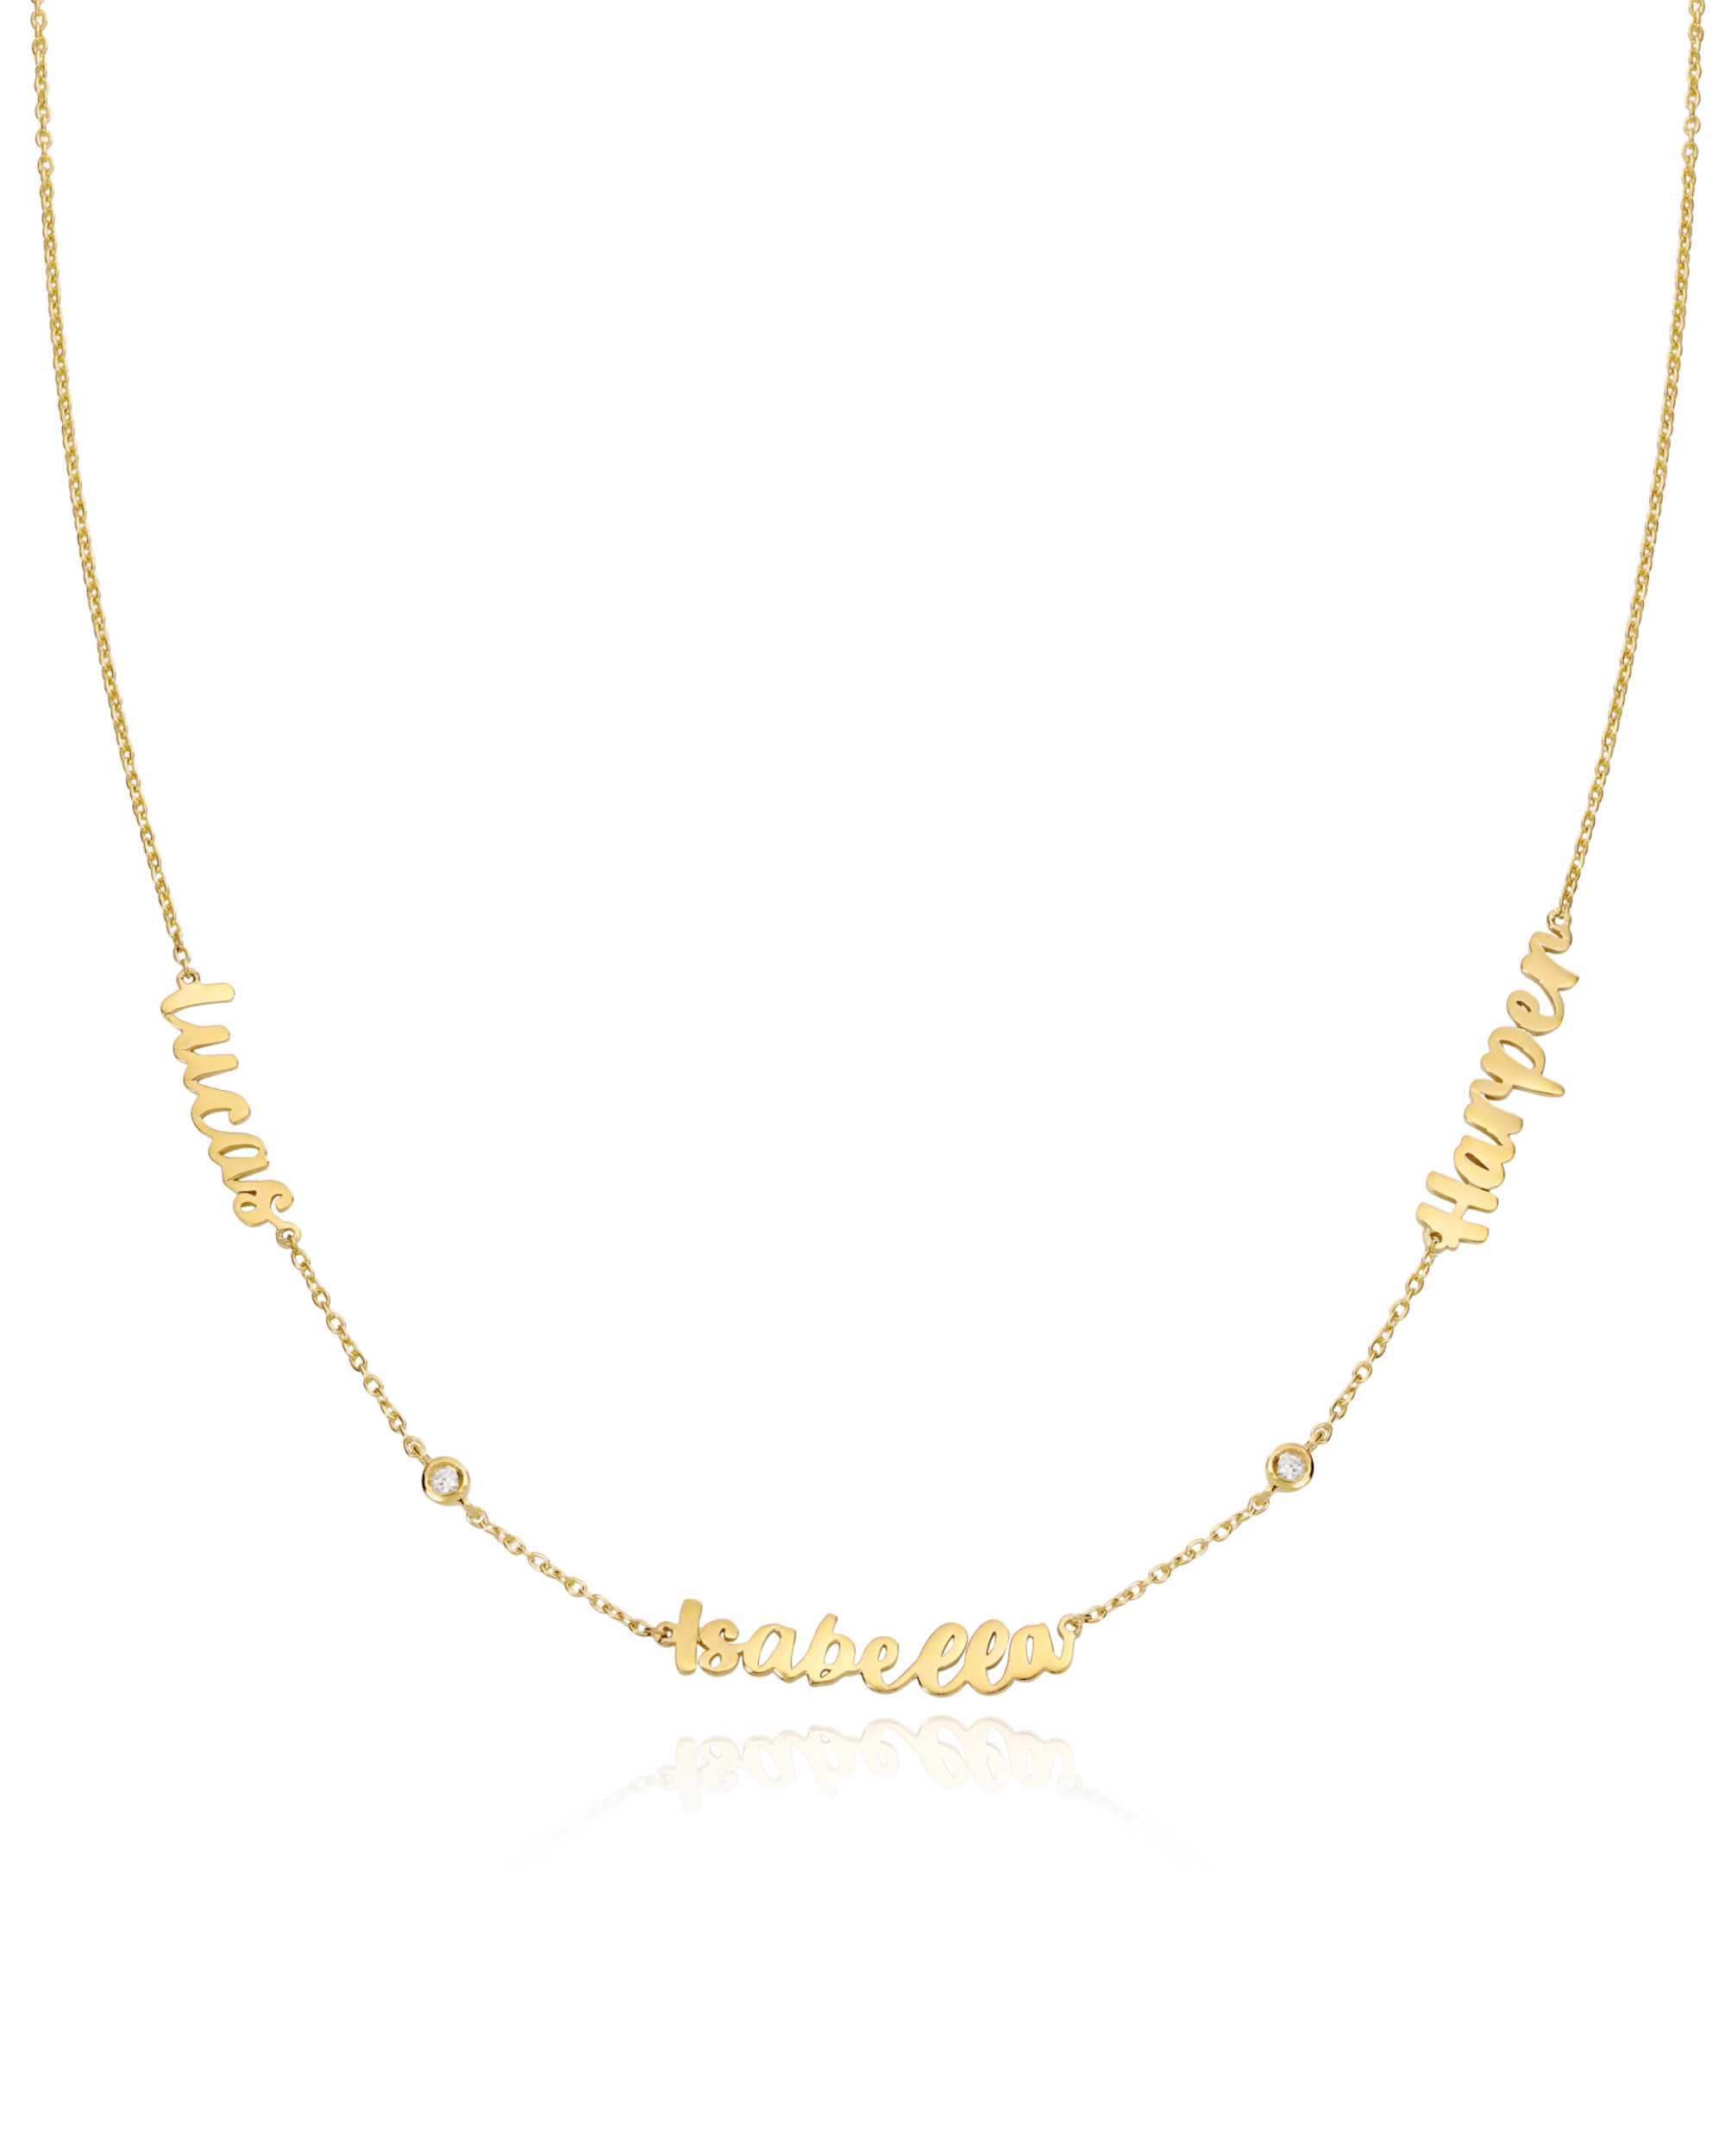 Name Necklace with Diamonds - 18K Gold Vermeil Necklaces magal-dev 1 Name + 1 Diamond 16" 